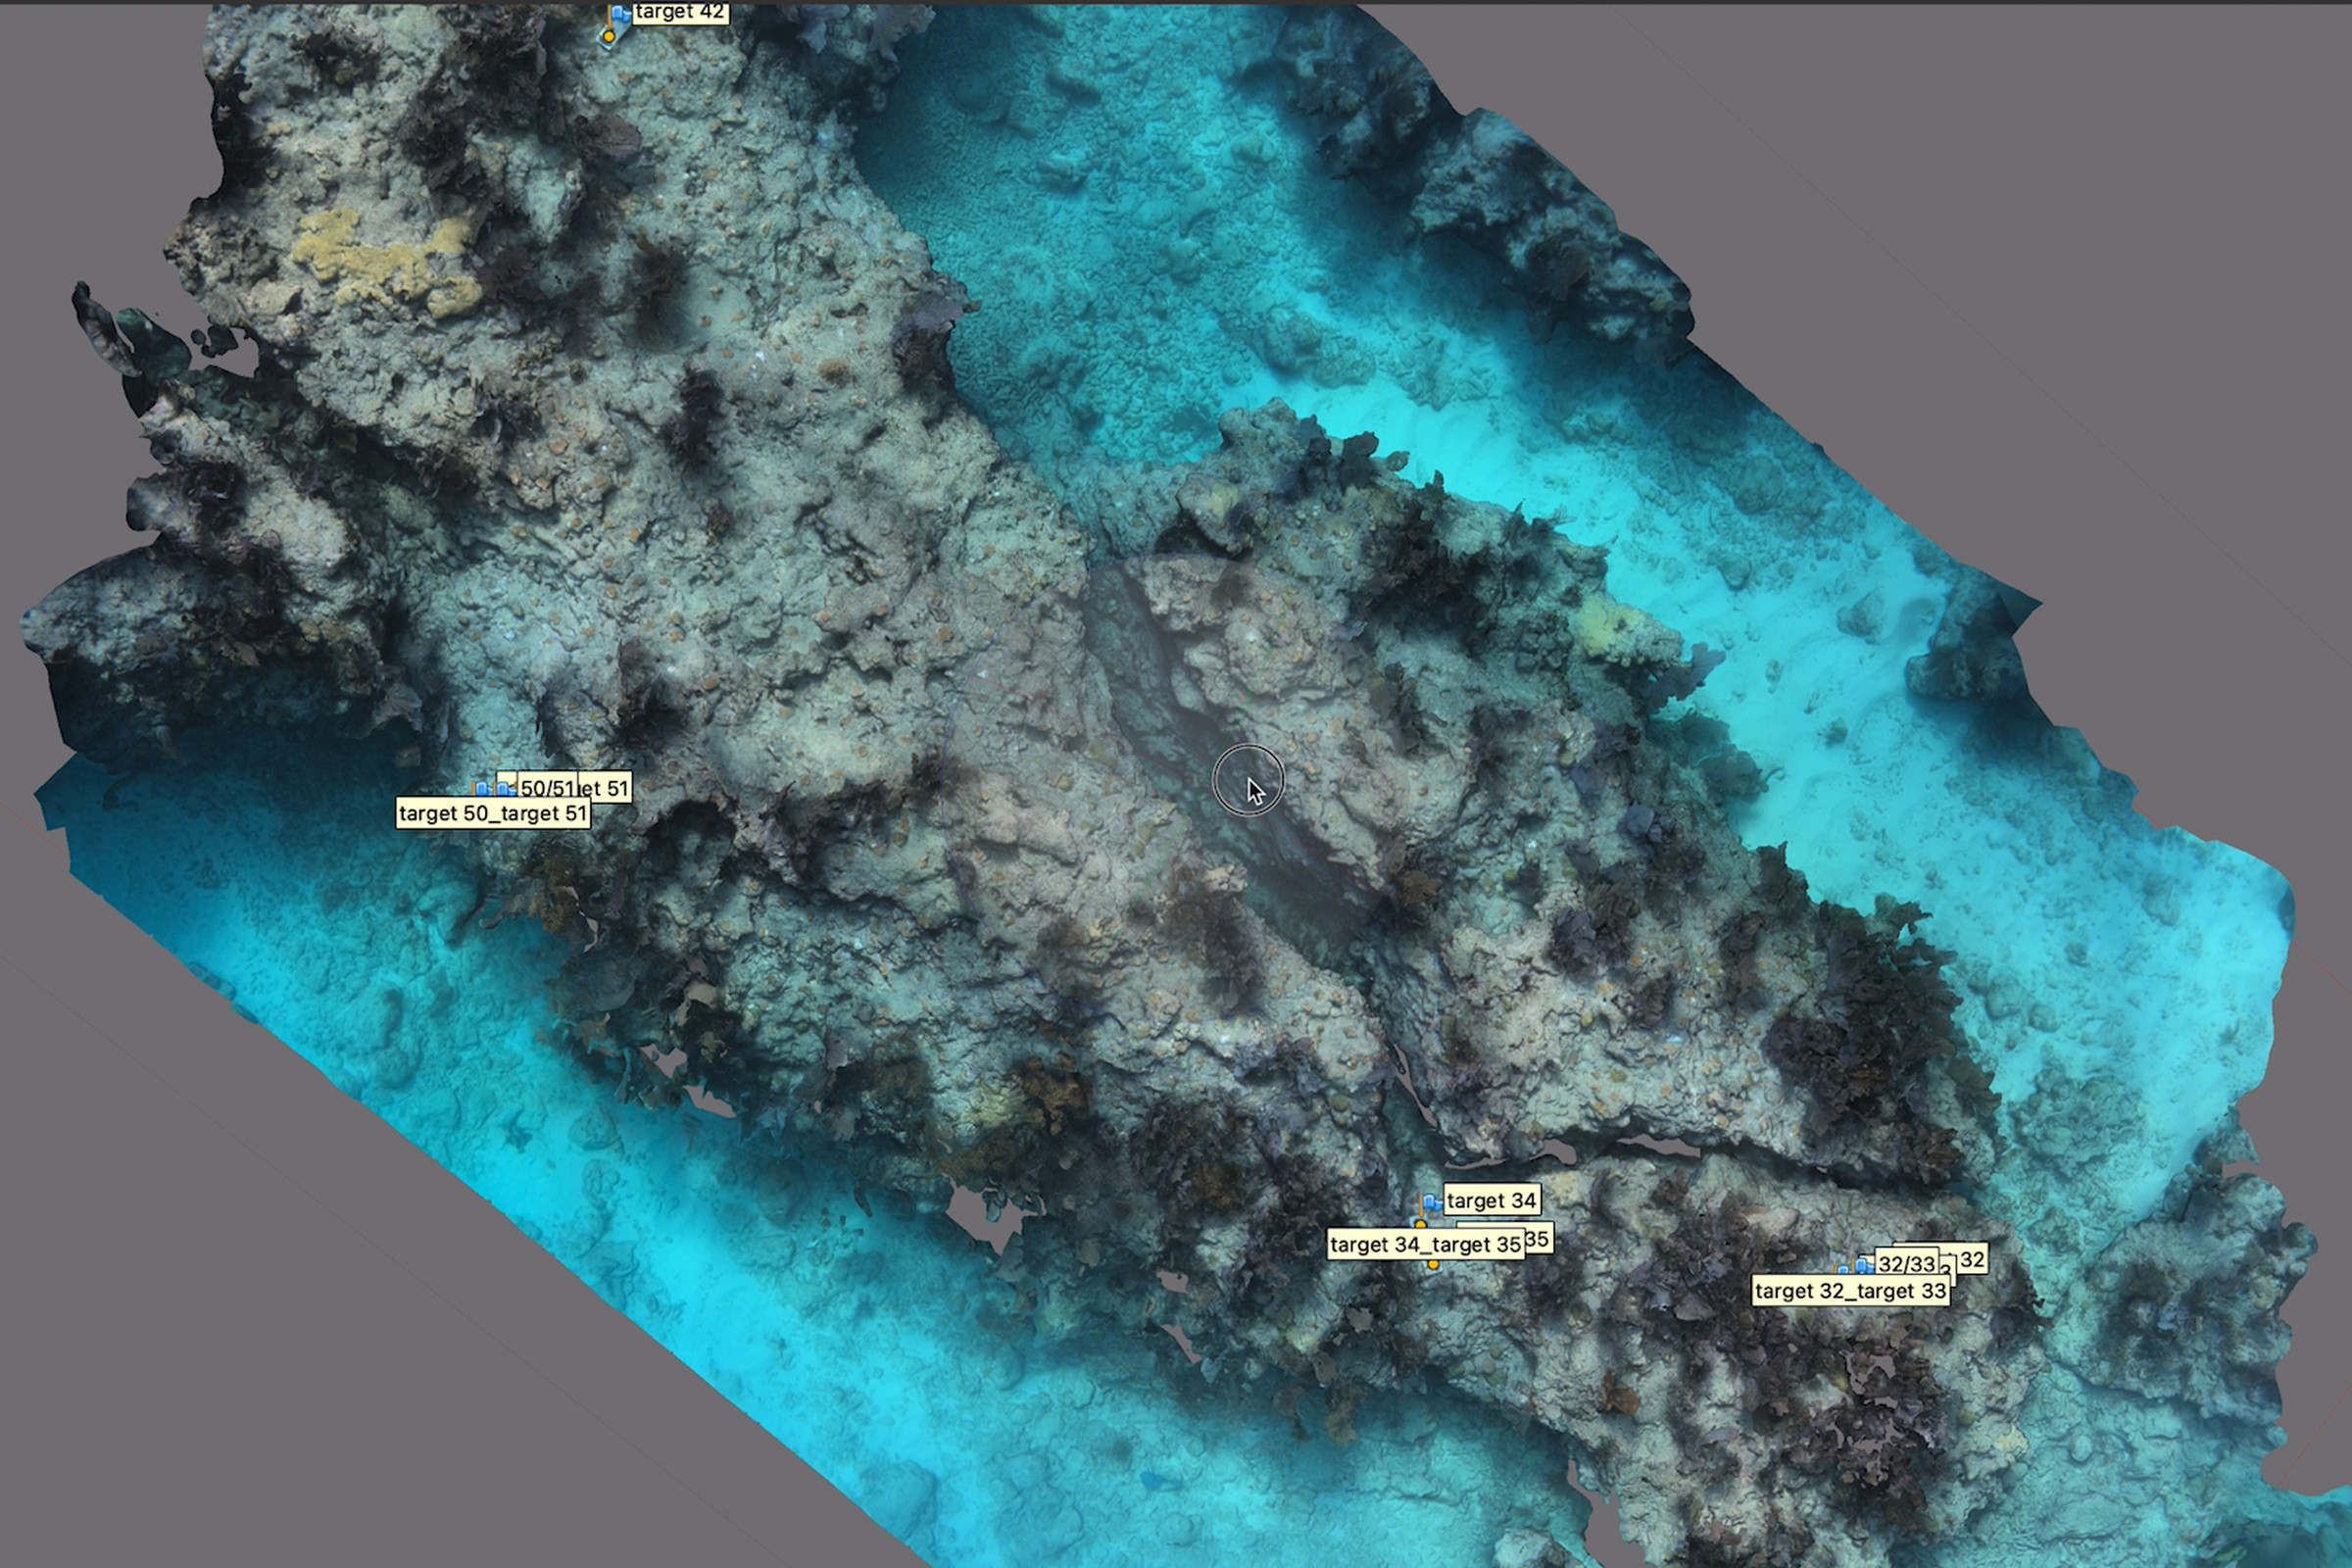 An image of a 3D map of part of a reef.